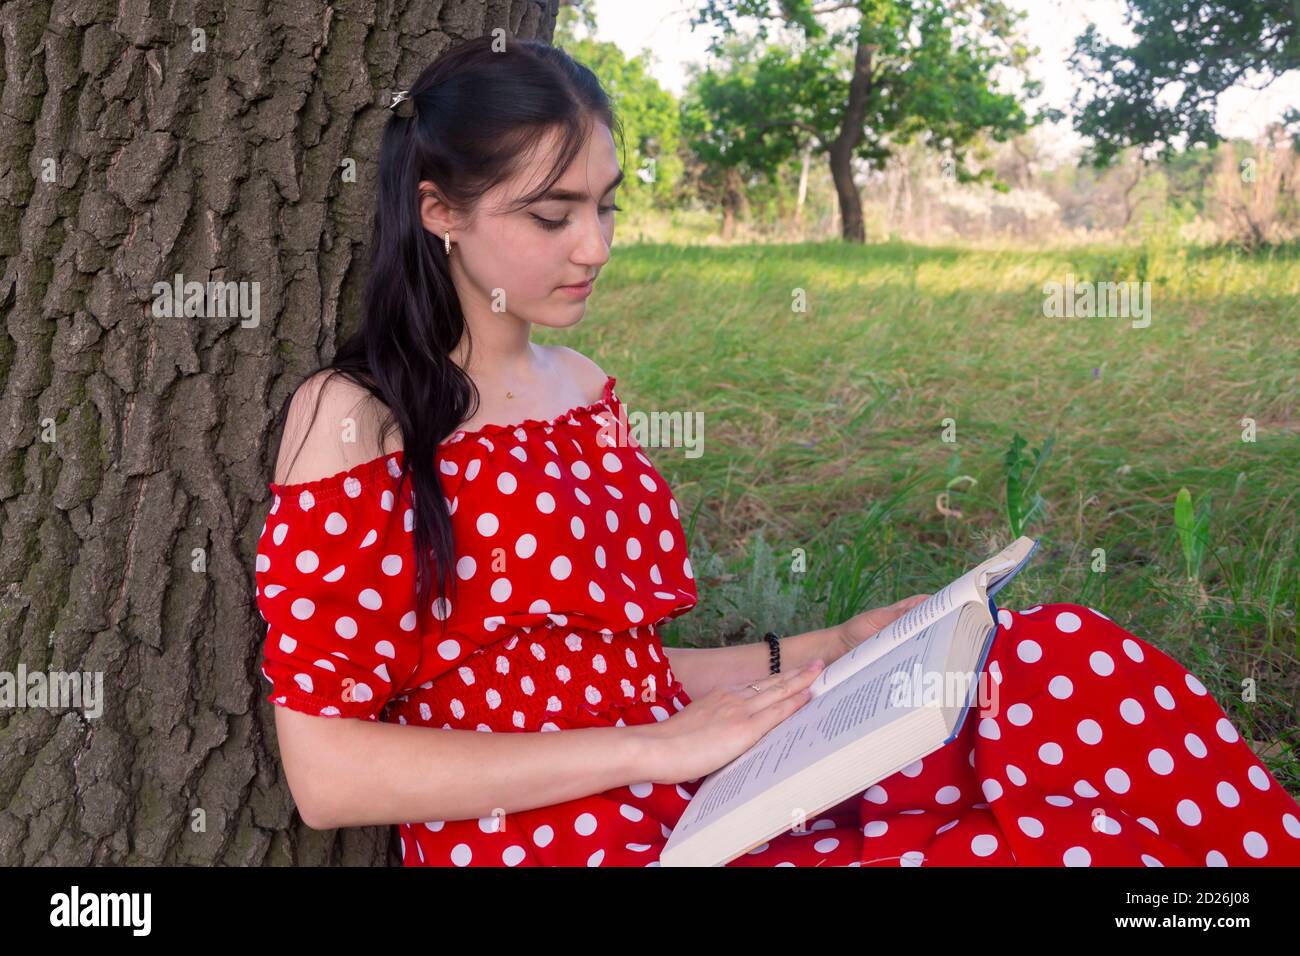 Young beautiful woman in red dress reads a book in the park. The lady with her back to the tree trunk in the summer outdoors spends her leisure time. Stock Photo